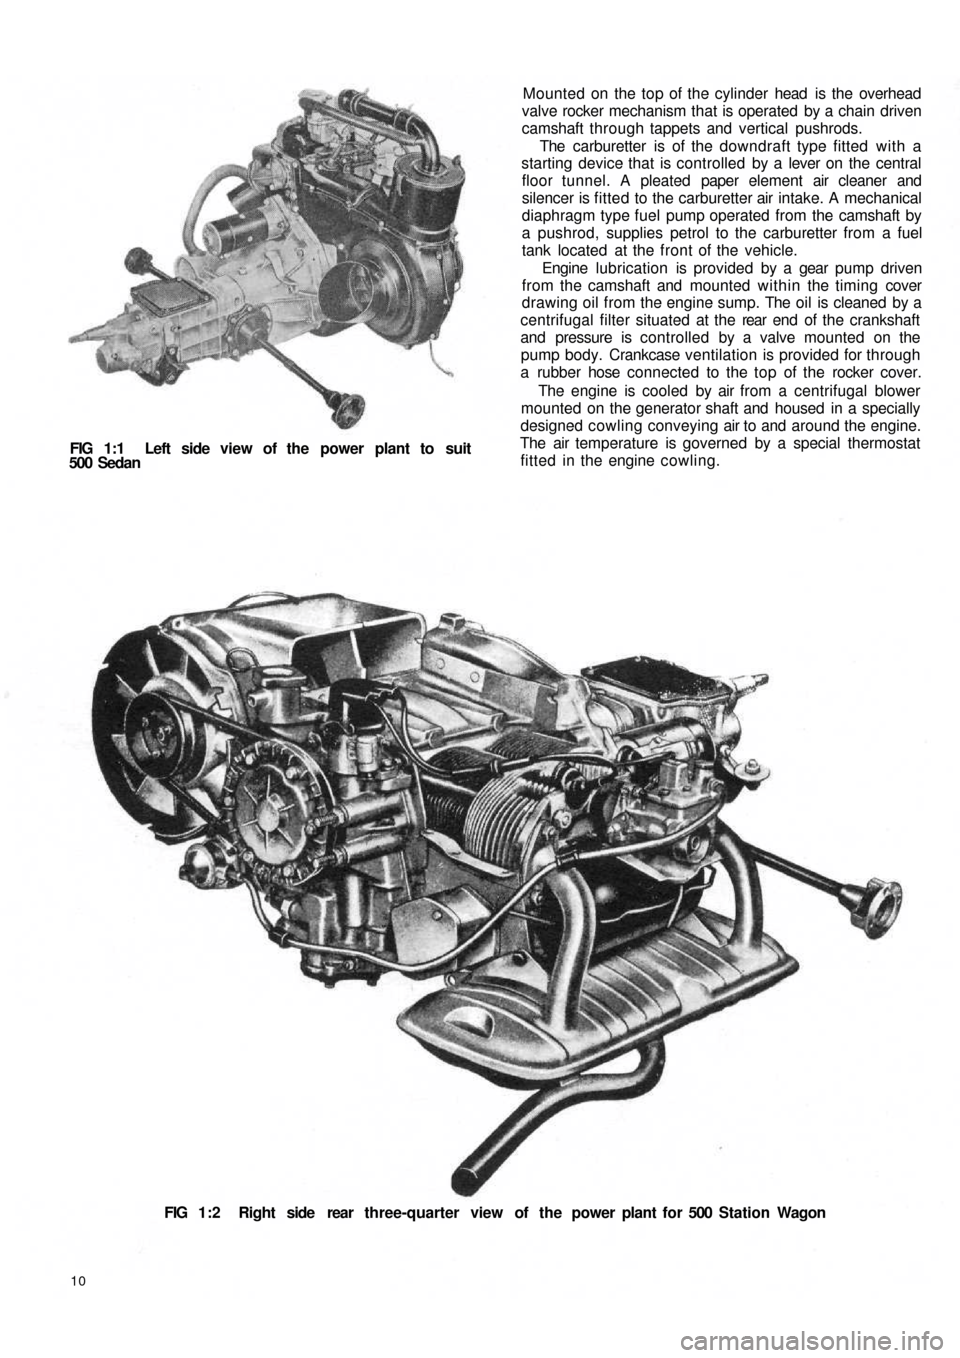 FIAT 500 1966 1.G Workshop Manual FIG 1:1  Left side view of the power plant to suit
500  Sedan
10
FIG 1:2  Right side  rear  three-quarter view of the power plant for 500 Station  Wagon Mounted on the top of the cylinder  head  is th